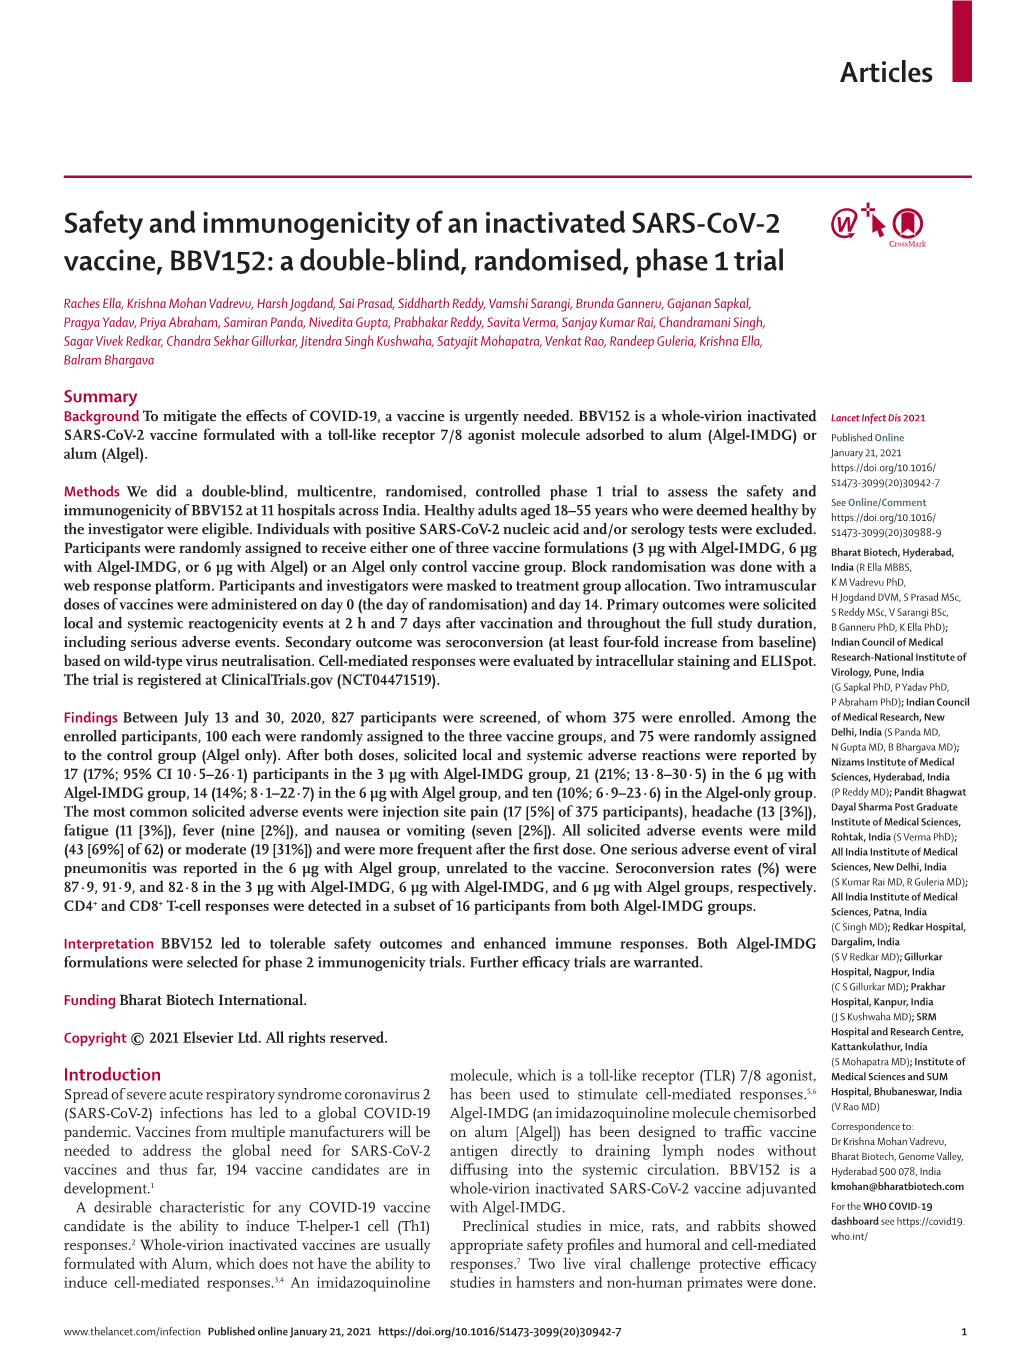 Safety and Immunogenicity of an Inactivated SARS-Cov-2 Vaccine, BBV152: a Double-Blind, Randomised, Phase 1 Trial